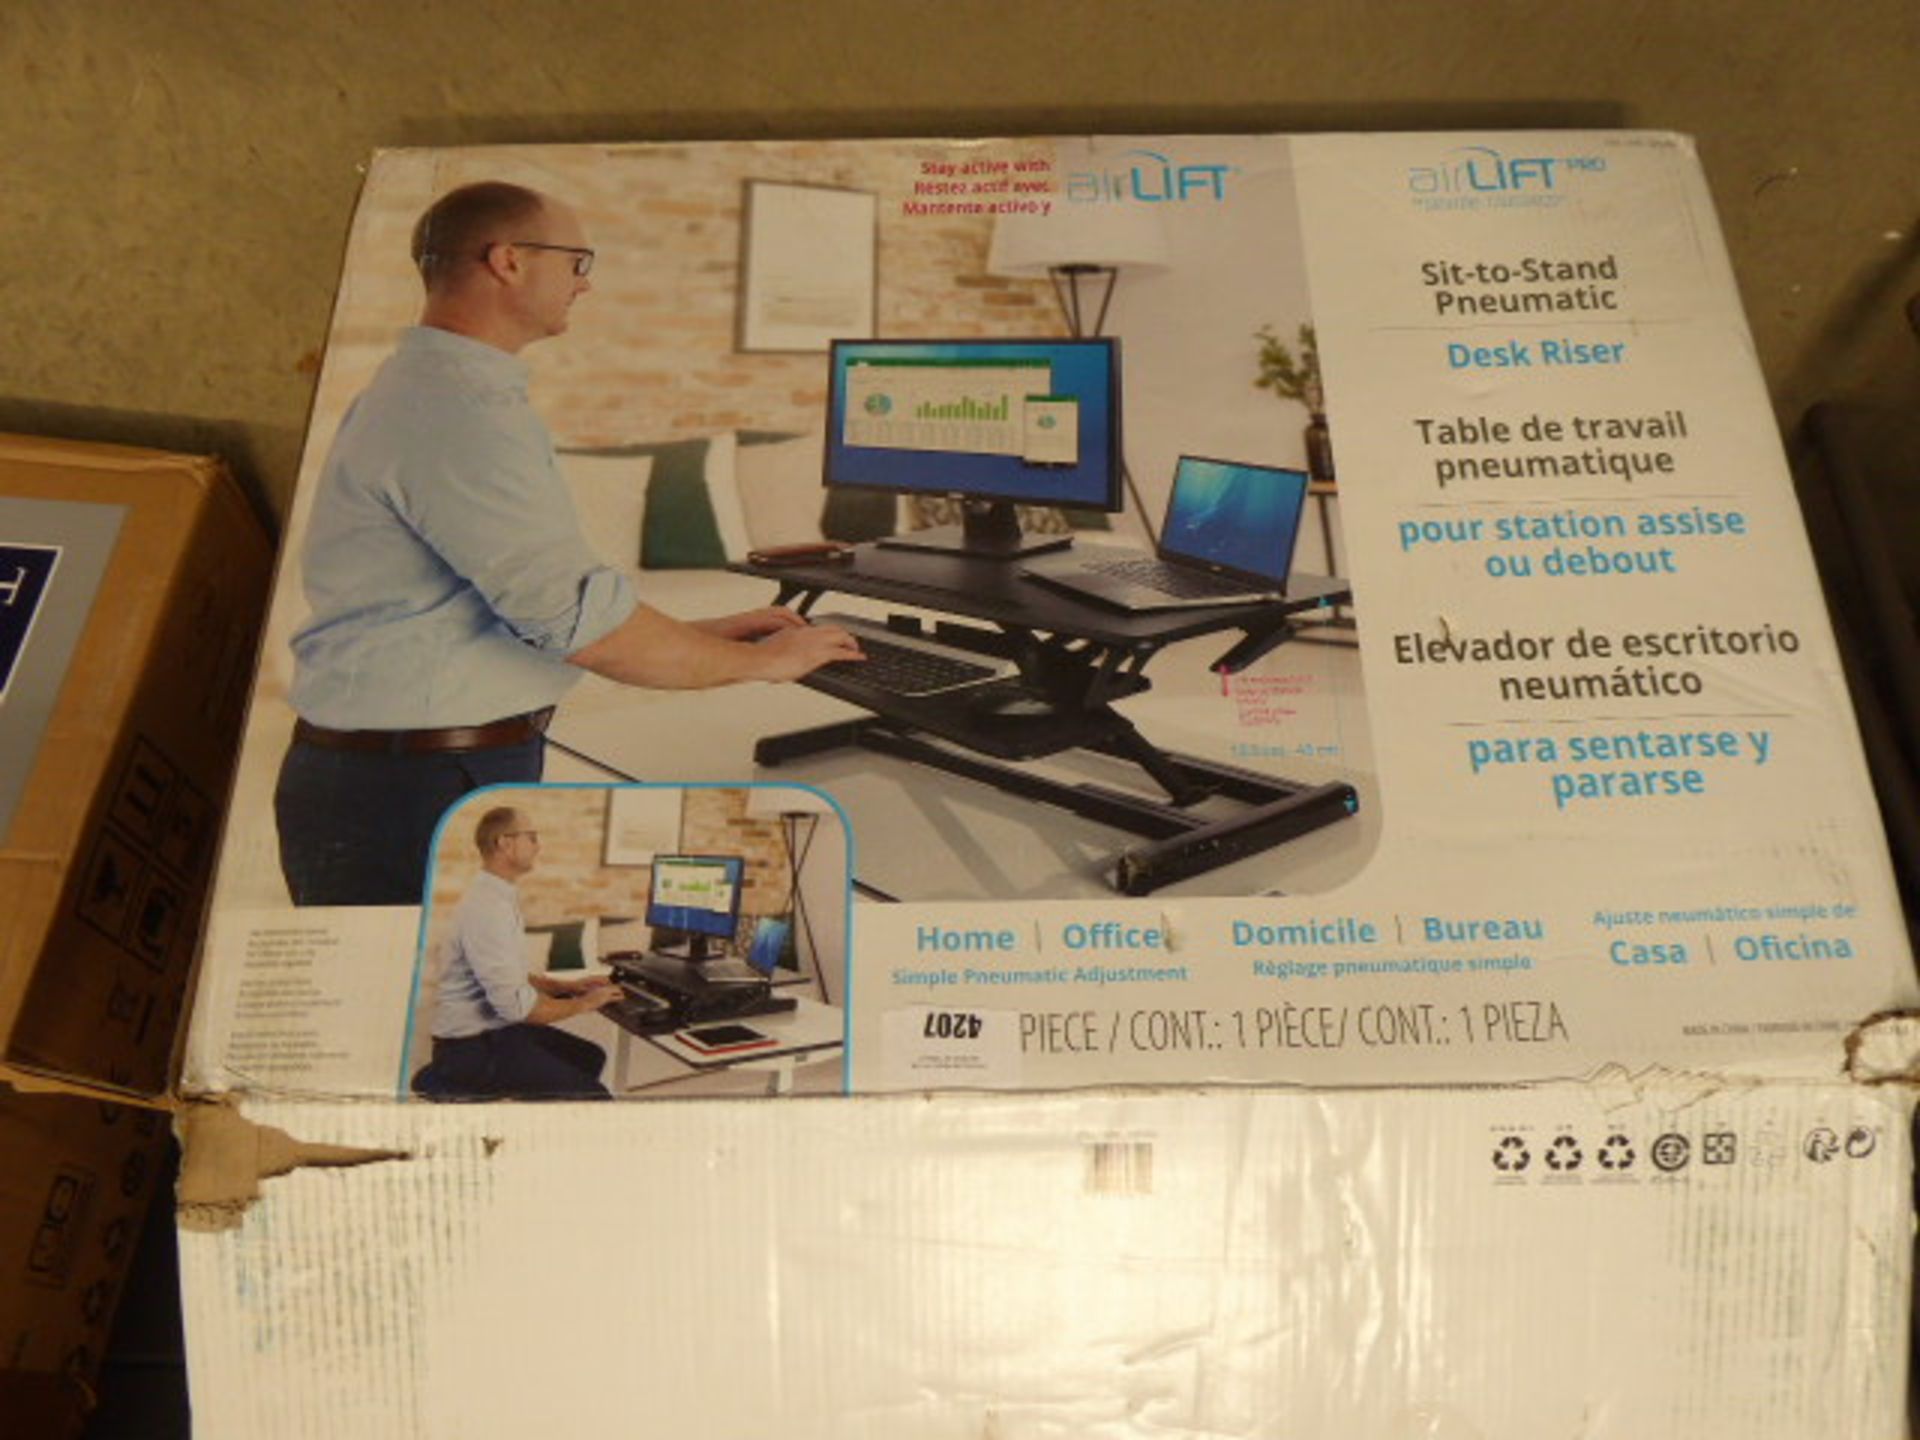 Airlift desk riser, boxed Item appears to be in ok condition